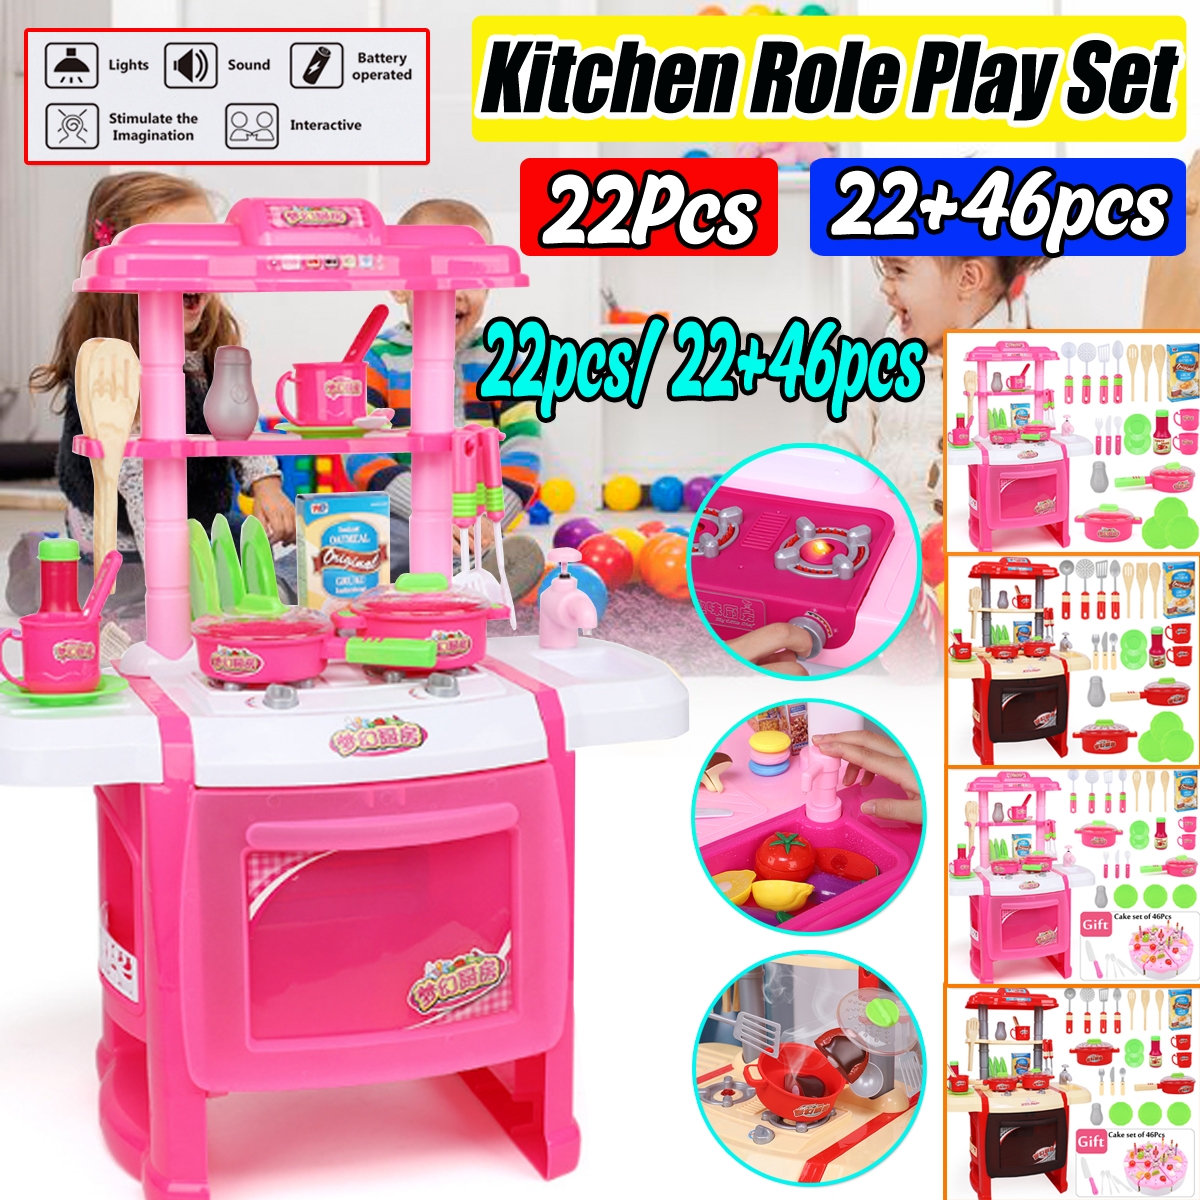 22Pcs/22+46Pcs Simulation Kitchen Role Play Cooking Set Toys with Sound Light for Kids Gift